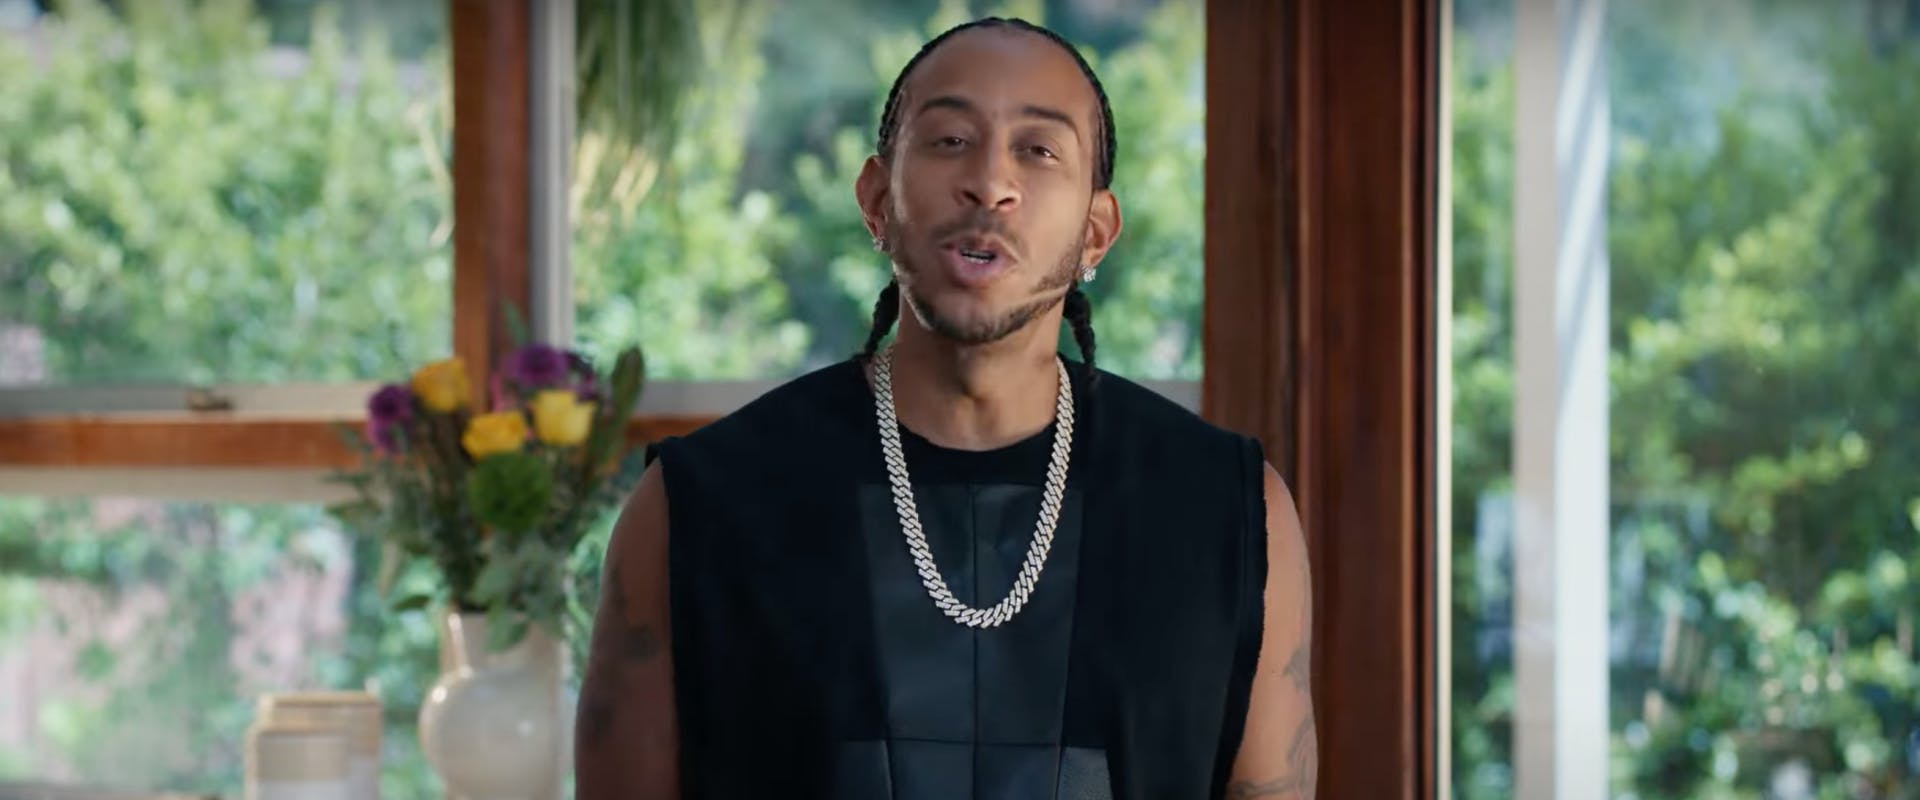 Watch Ludacris Team Up With Jake From State Farm For A New Commercial